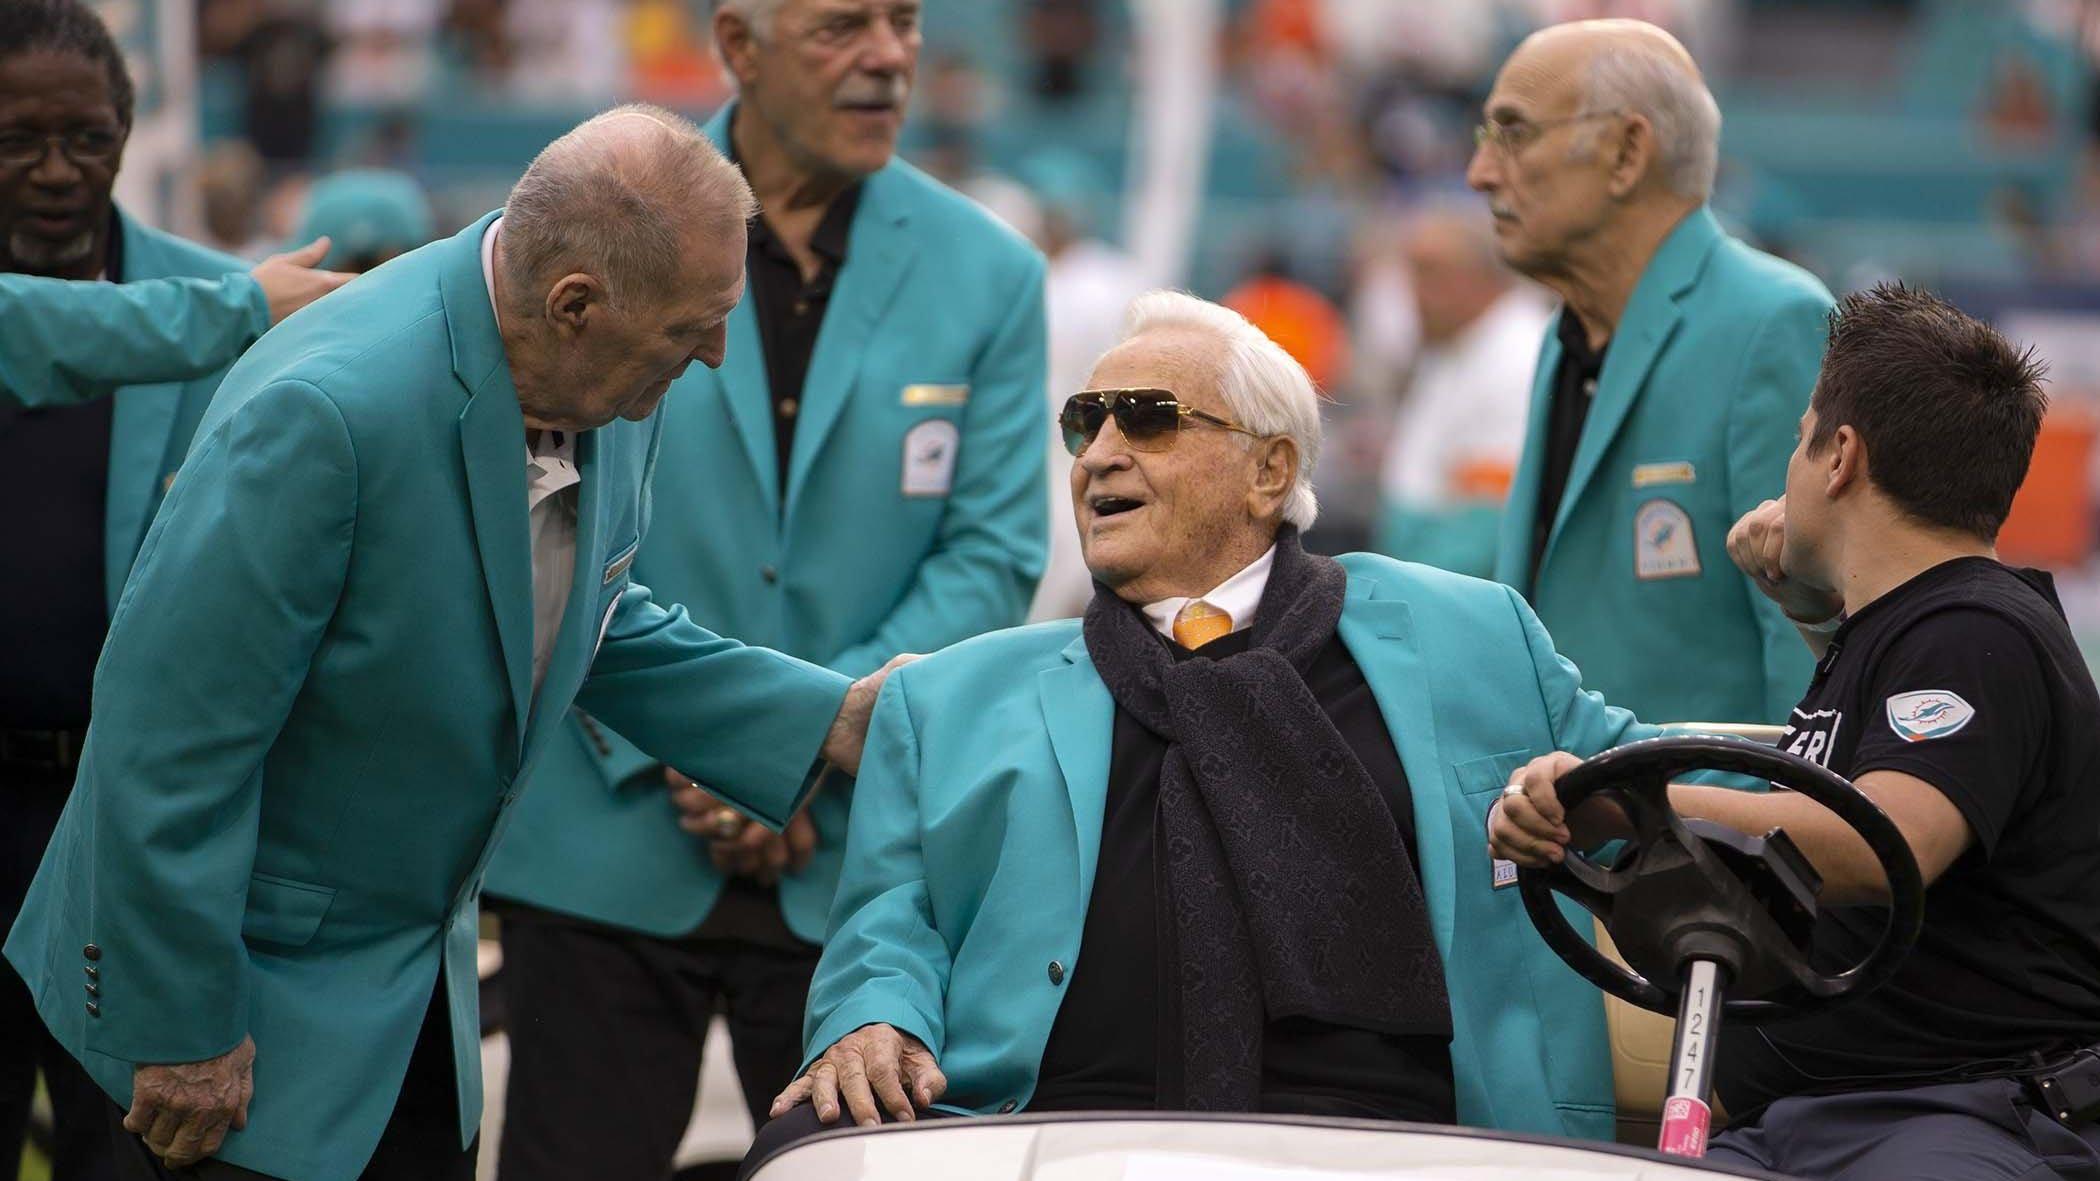 Coach Don Shula talks with Jim Kiick (left) with Larry Csonka and Manny Fernandez in the background. The Miami Dolphins 1972 team celebrated being named the best NFL team ever during a halftime ceremony at Hard Rock Stadium in Miami Gardens, Dec. 22, 2019.